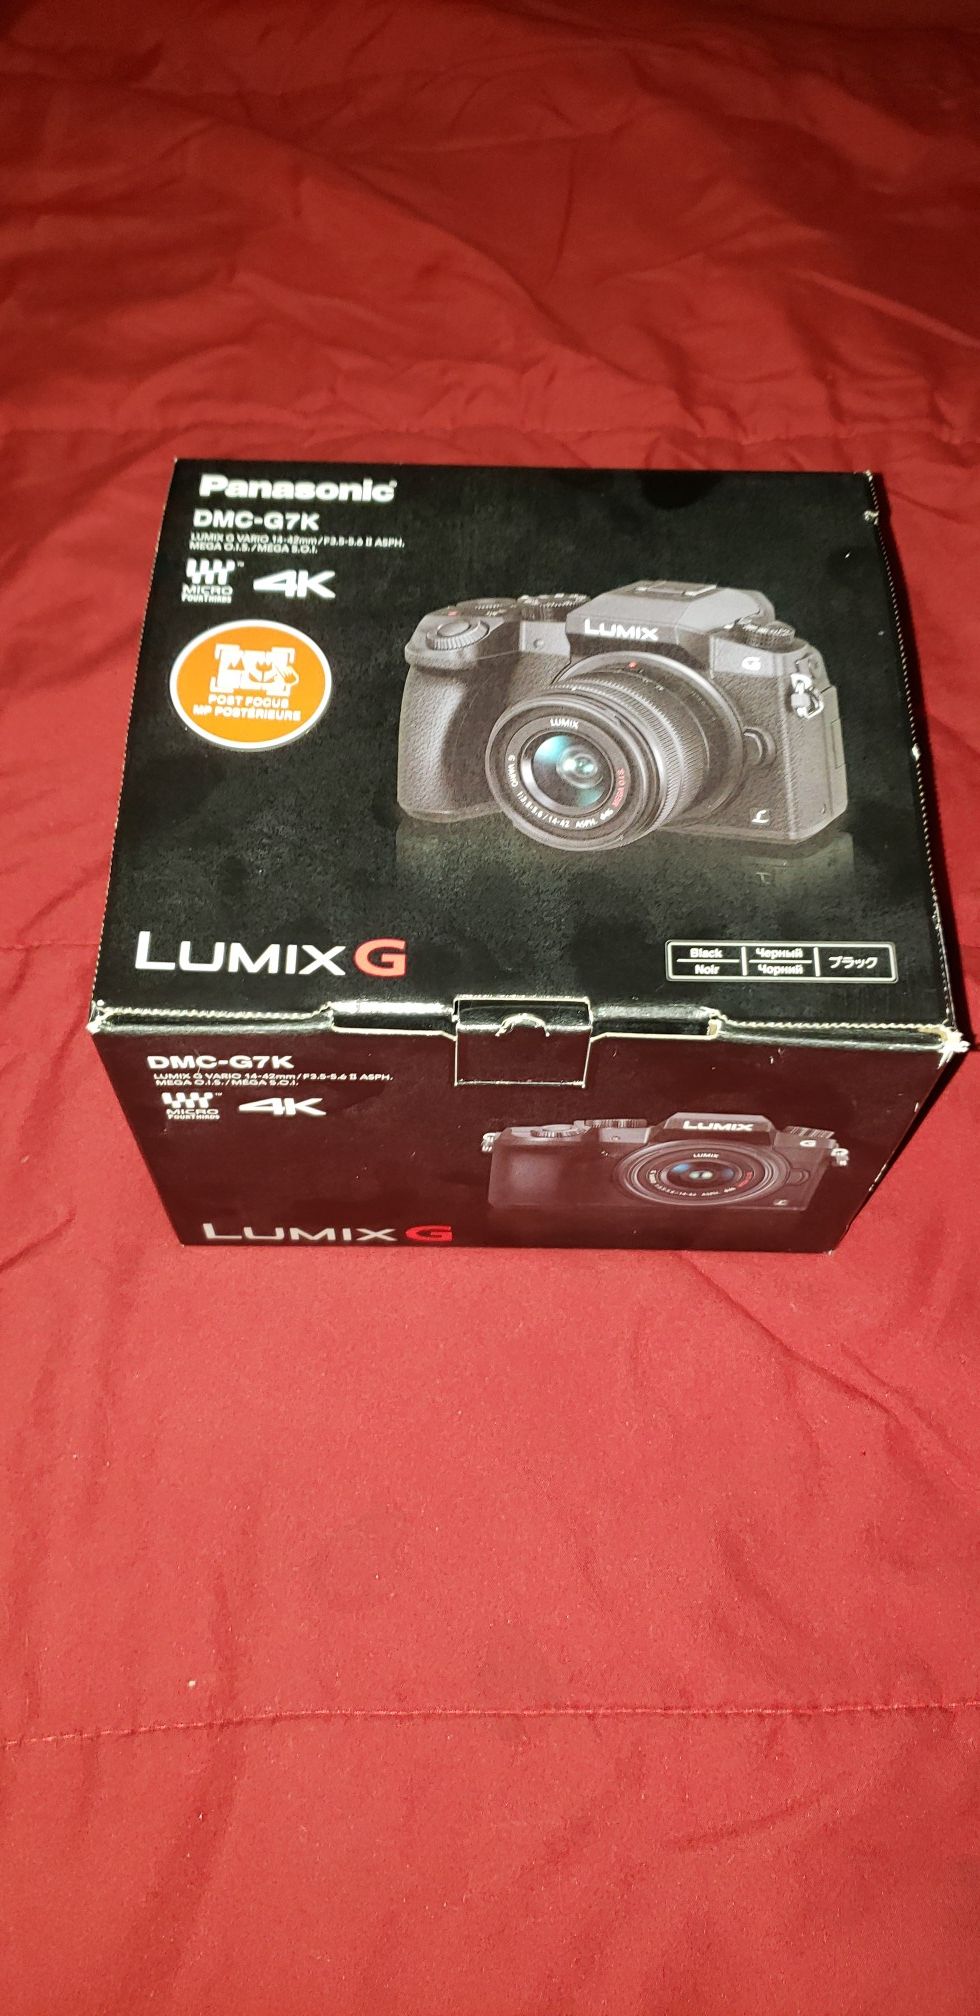 Lumix G7 in box never used with accessories, Rode microphone, universal camera stand, deadcat go mic windshield.